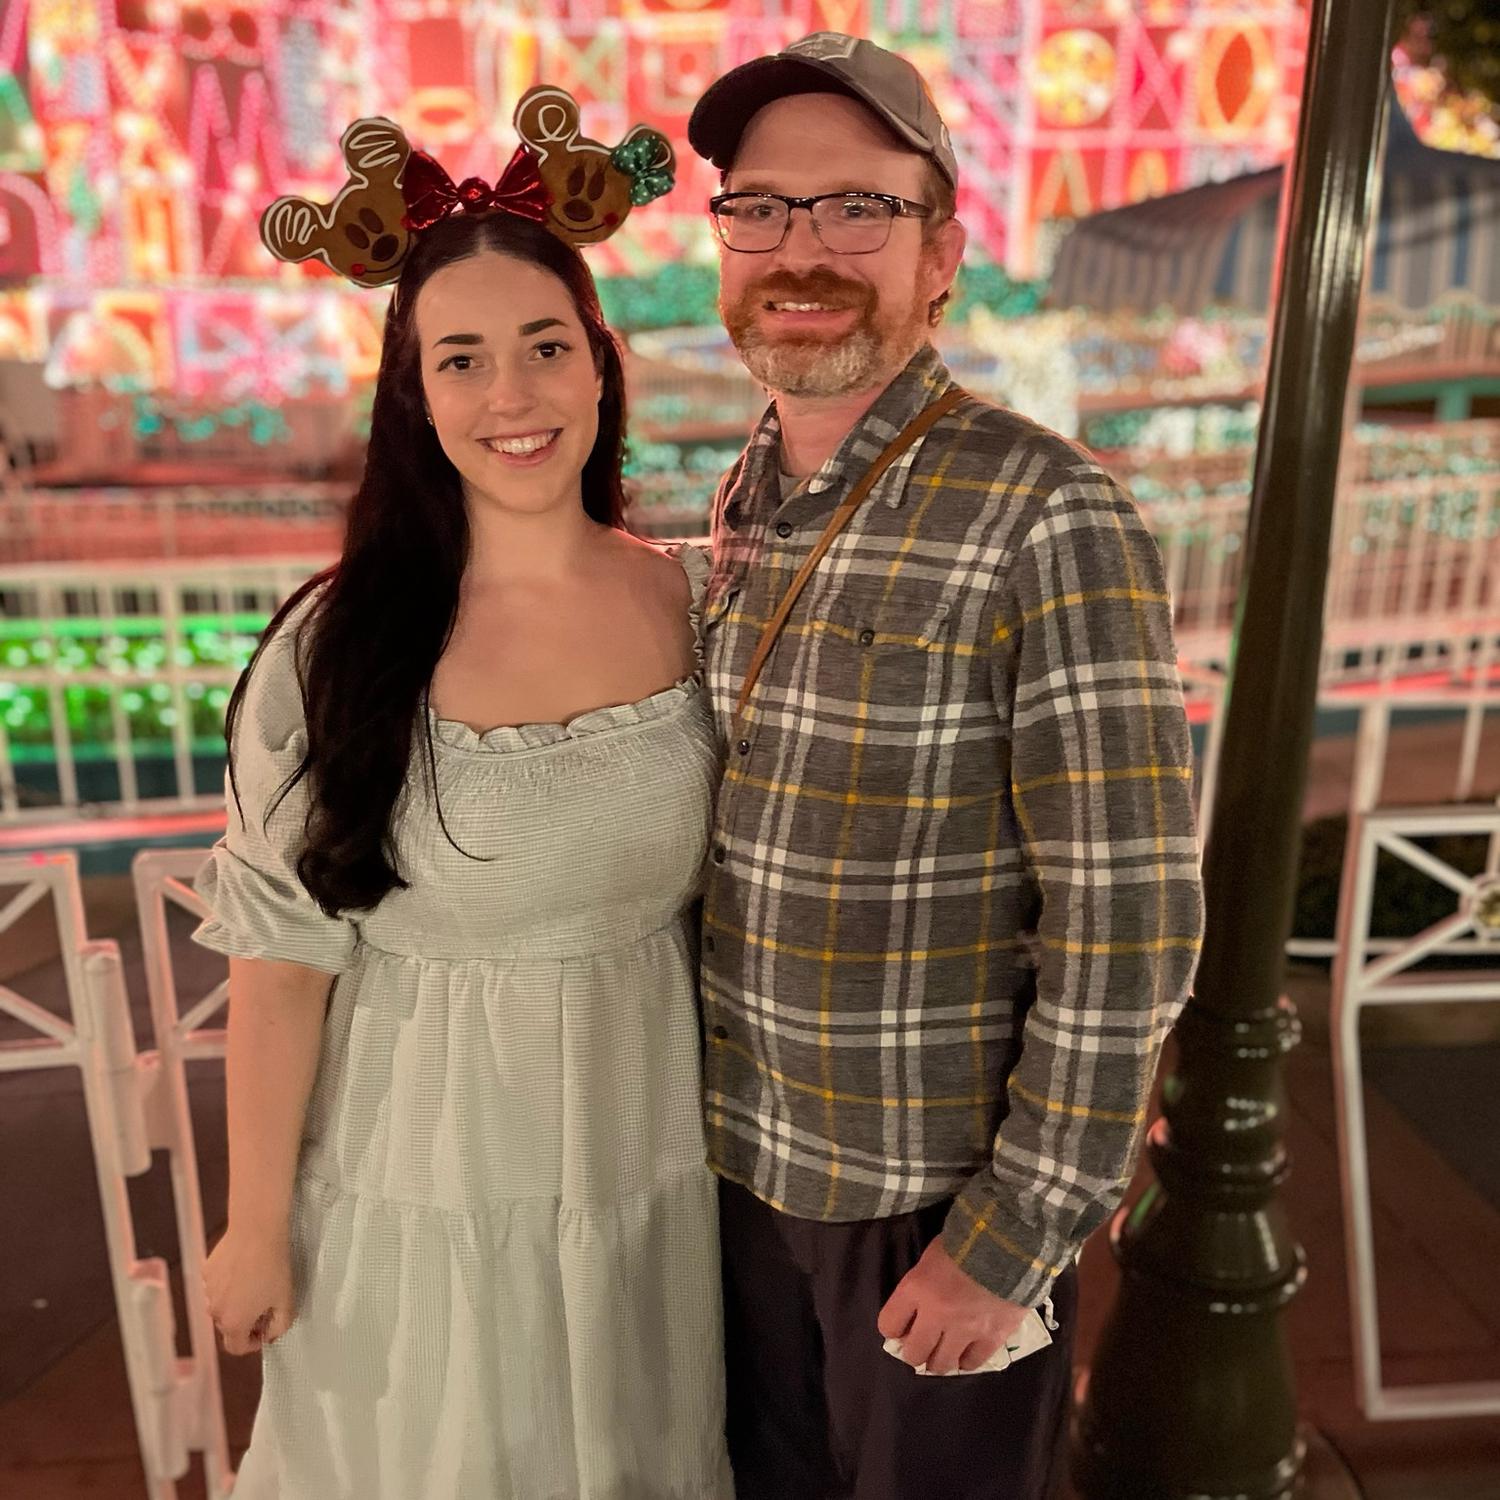 Christmas time at Disneyland is our favorite time of year!